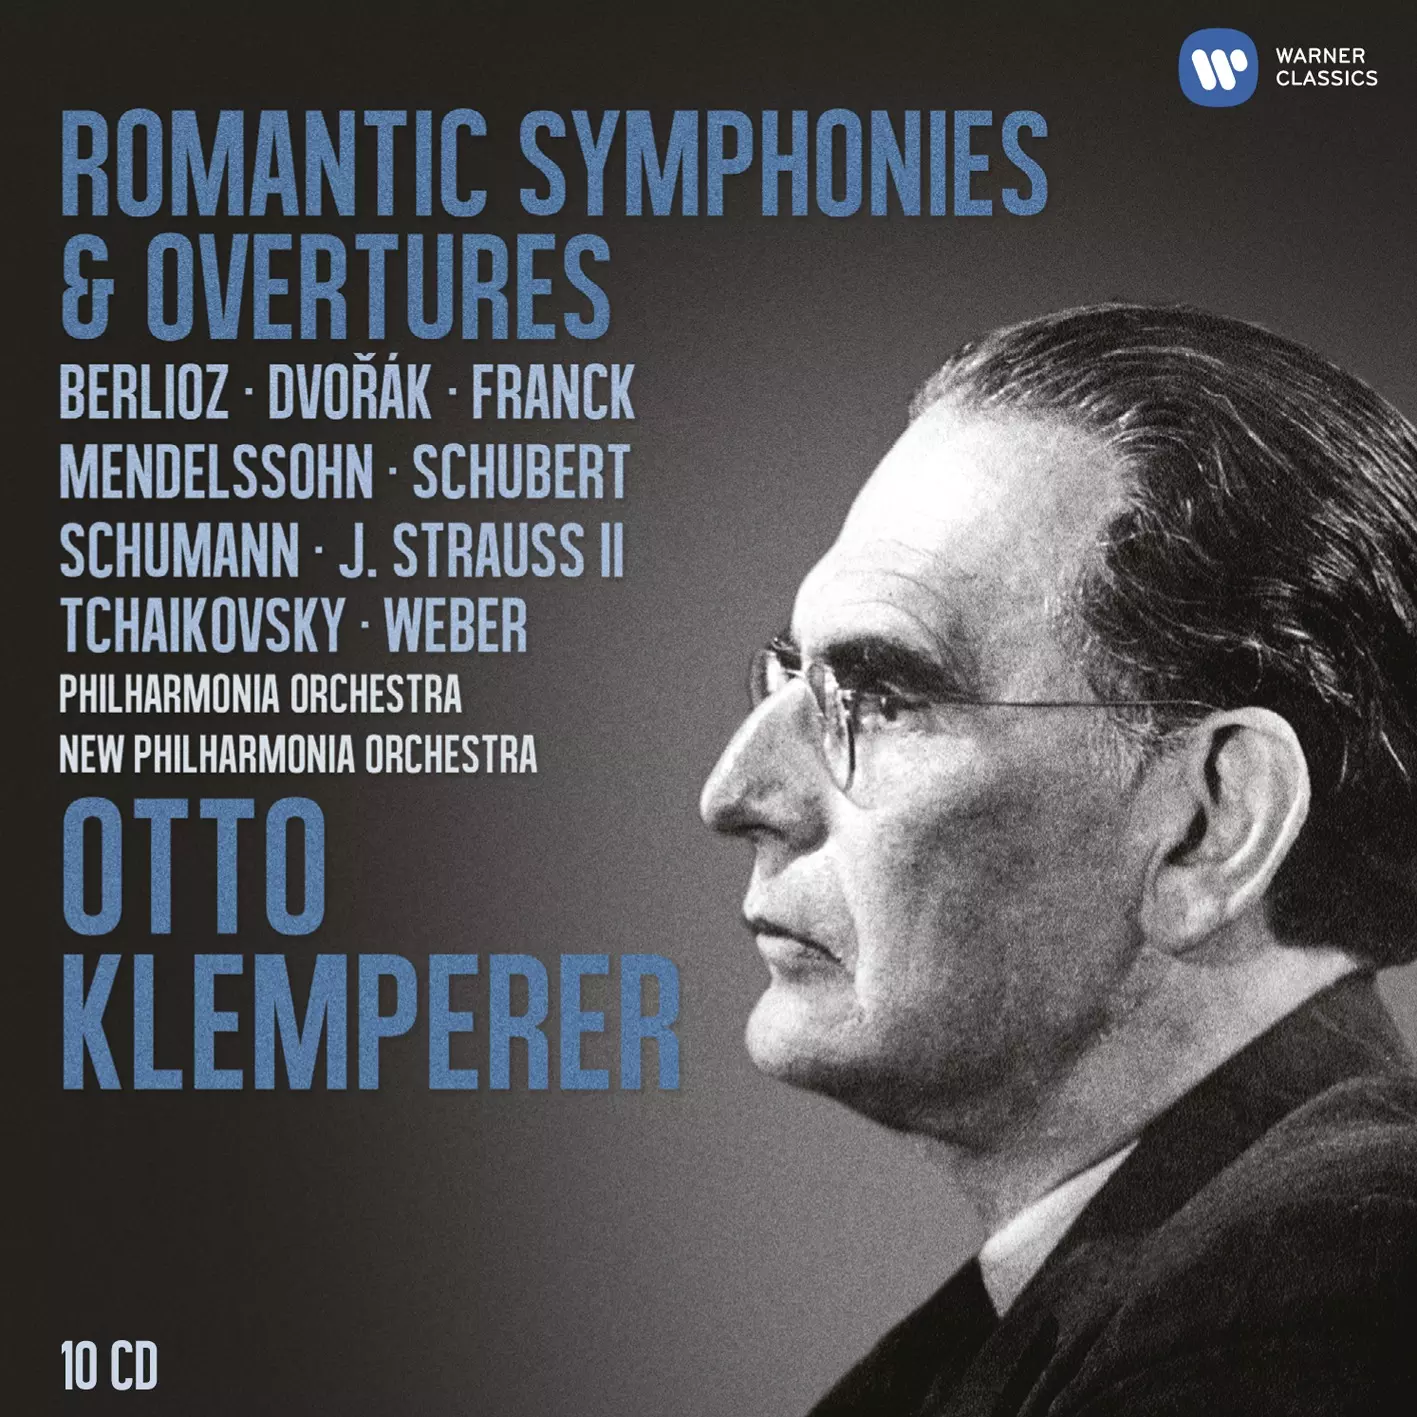 Romantic Symphonies and Overtures